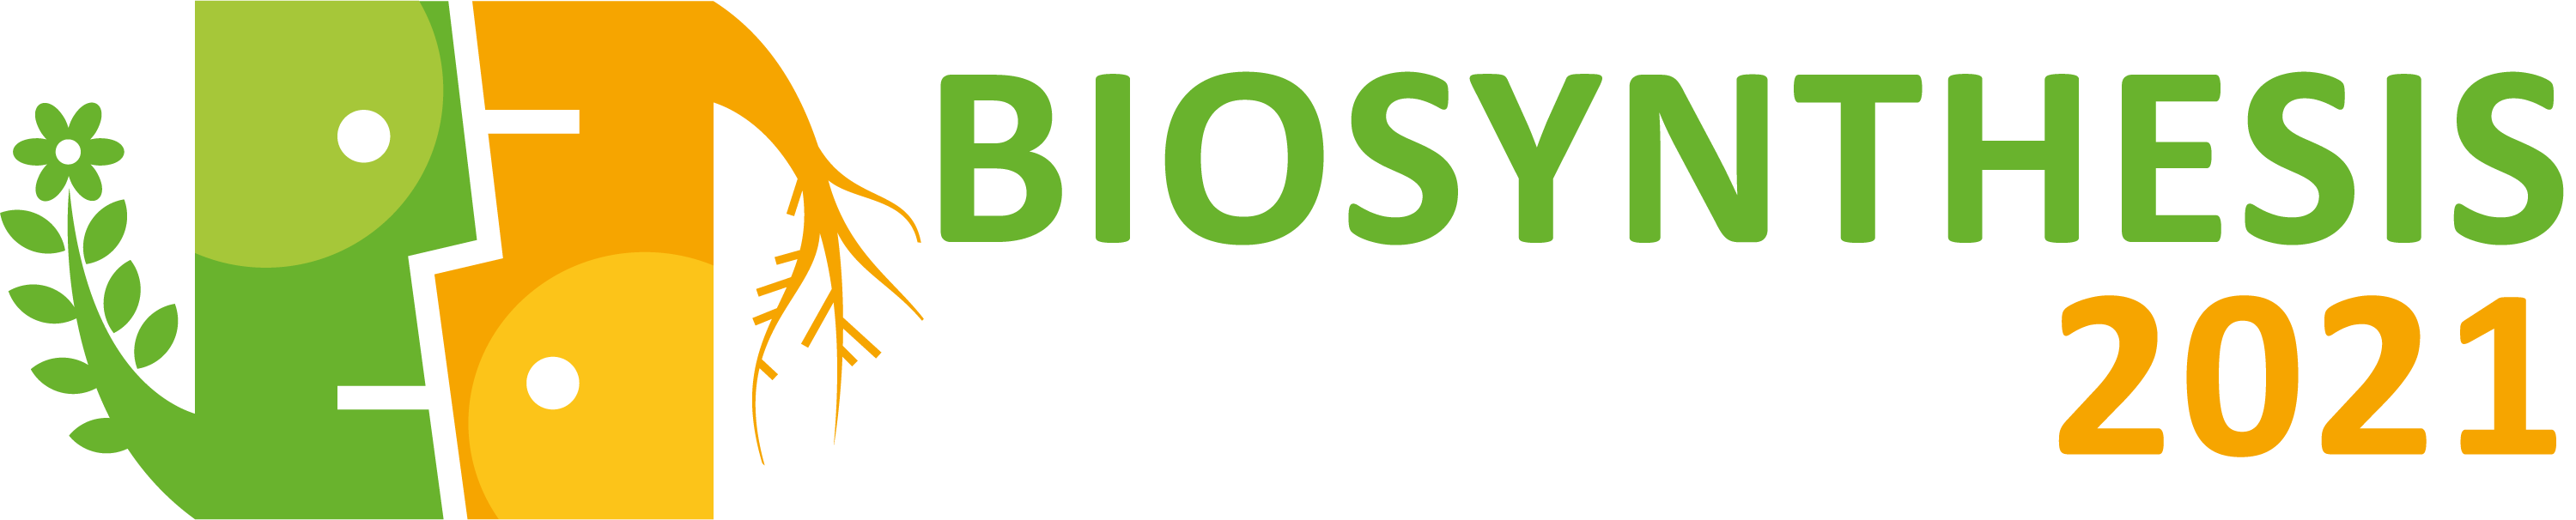 BioSynthesis 2021